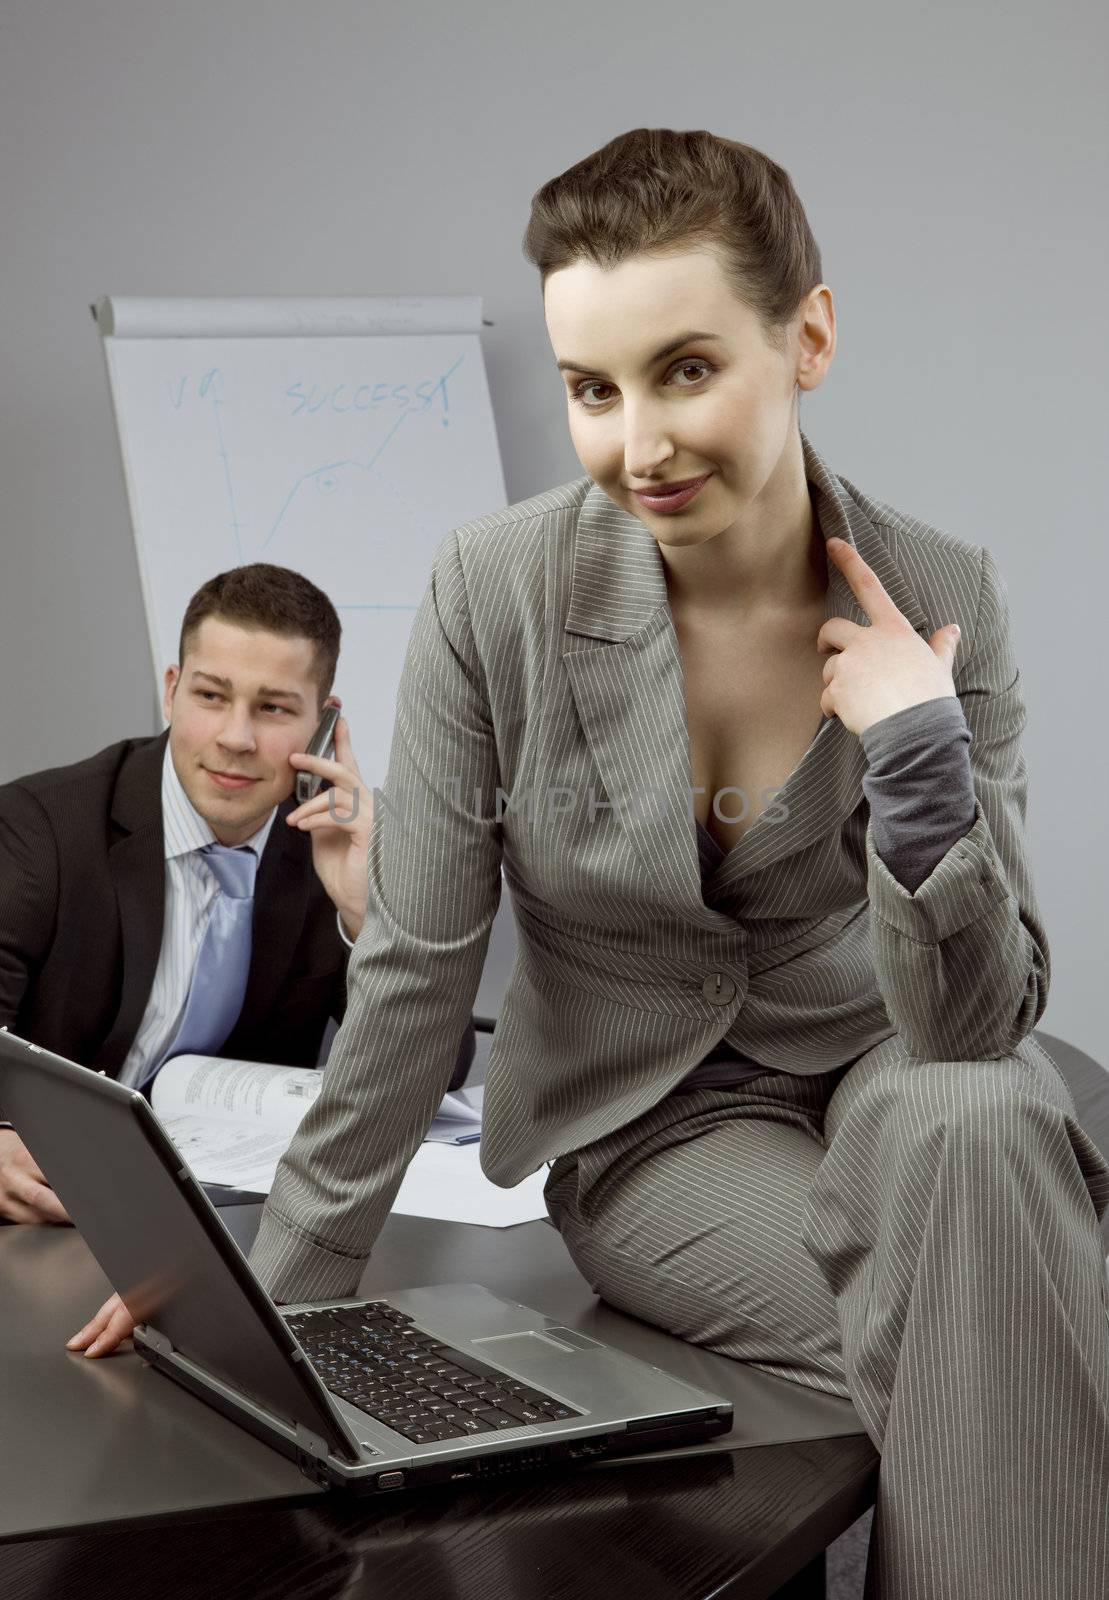 Business couple portrait - young man and woman on business meeting